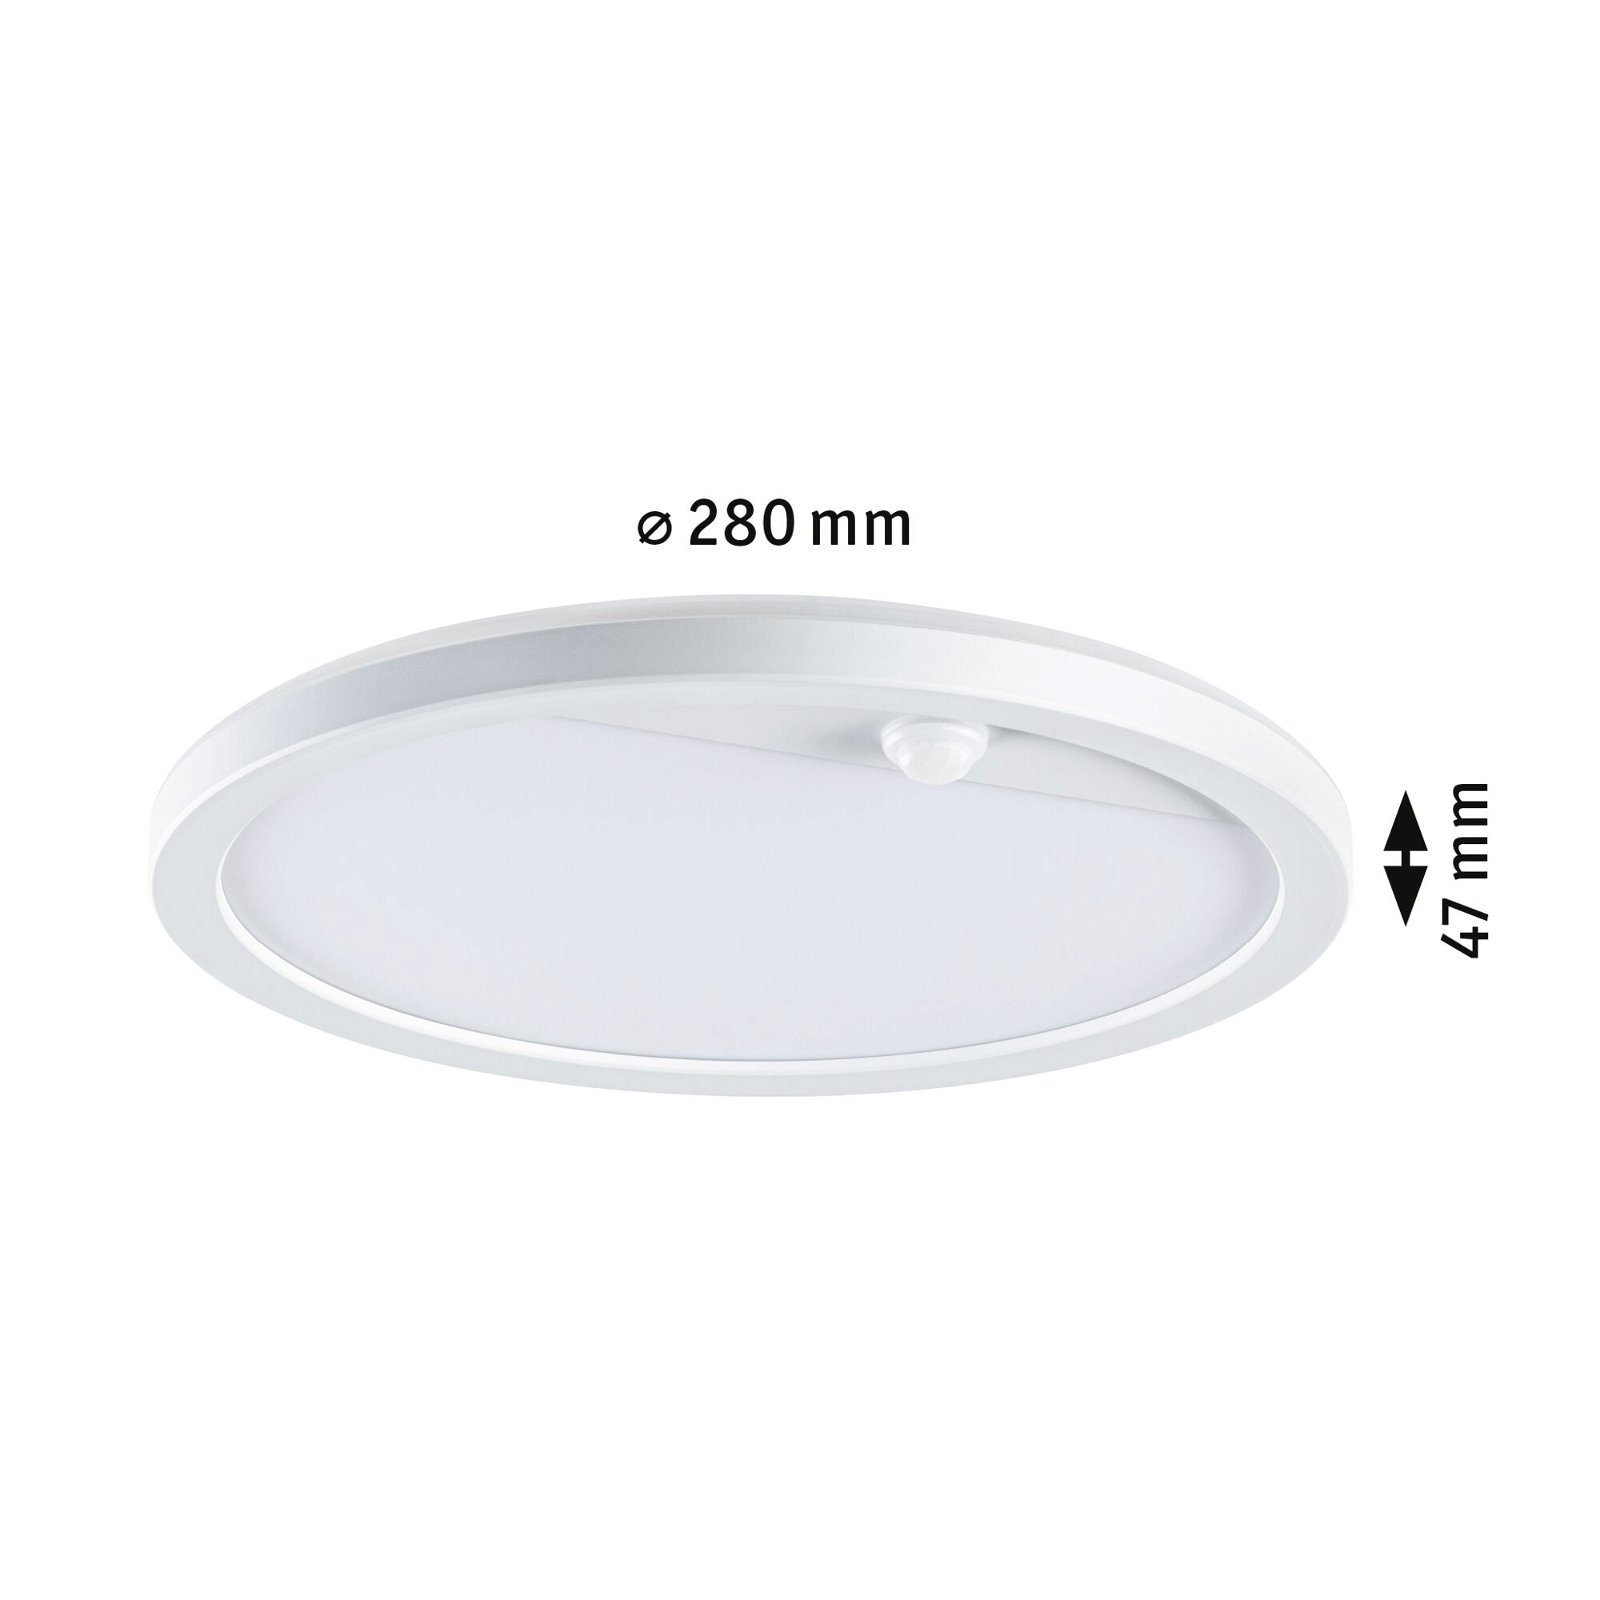 LED Exterior panel Lamina Backlight Motion detector insect friendly IP44 round 280mm Tunable Warm 14W 1150lm 230V White Plastic